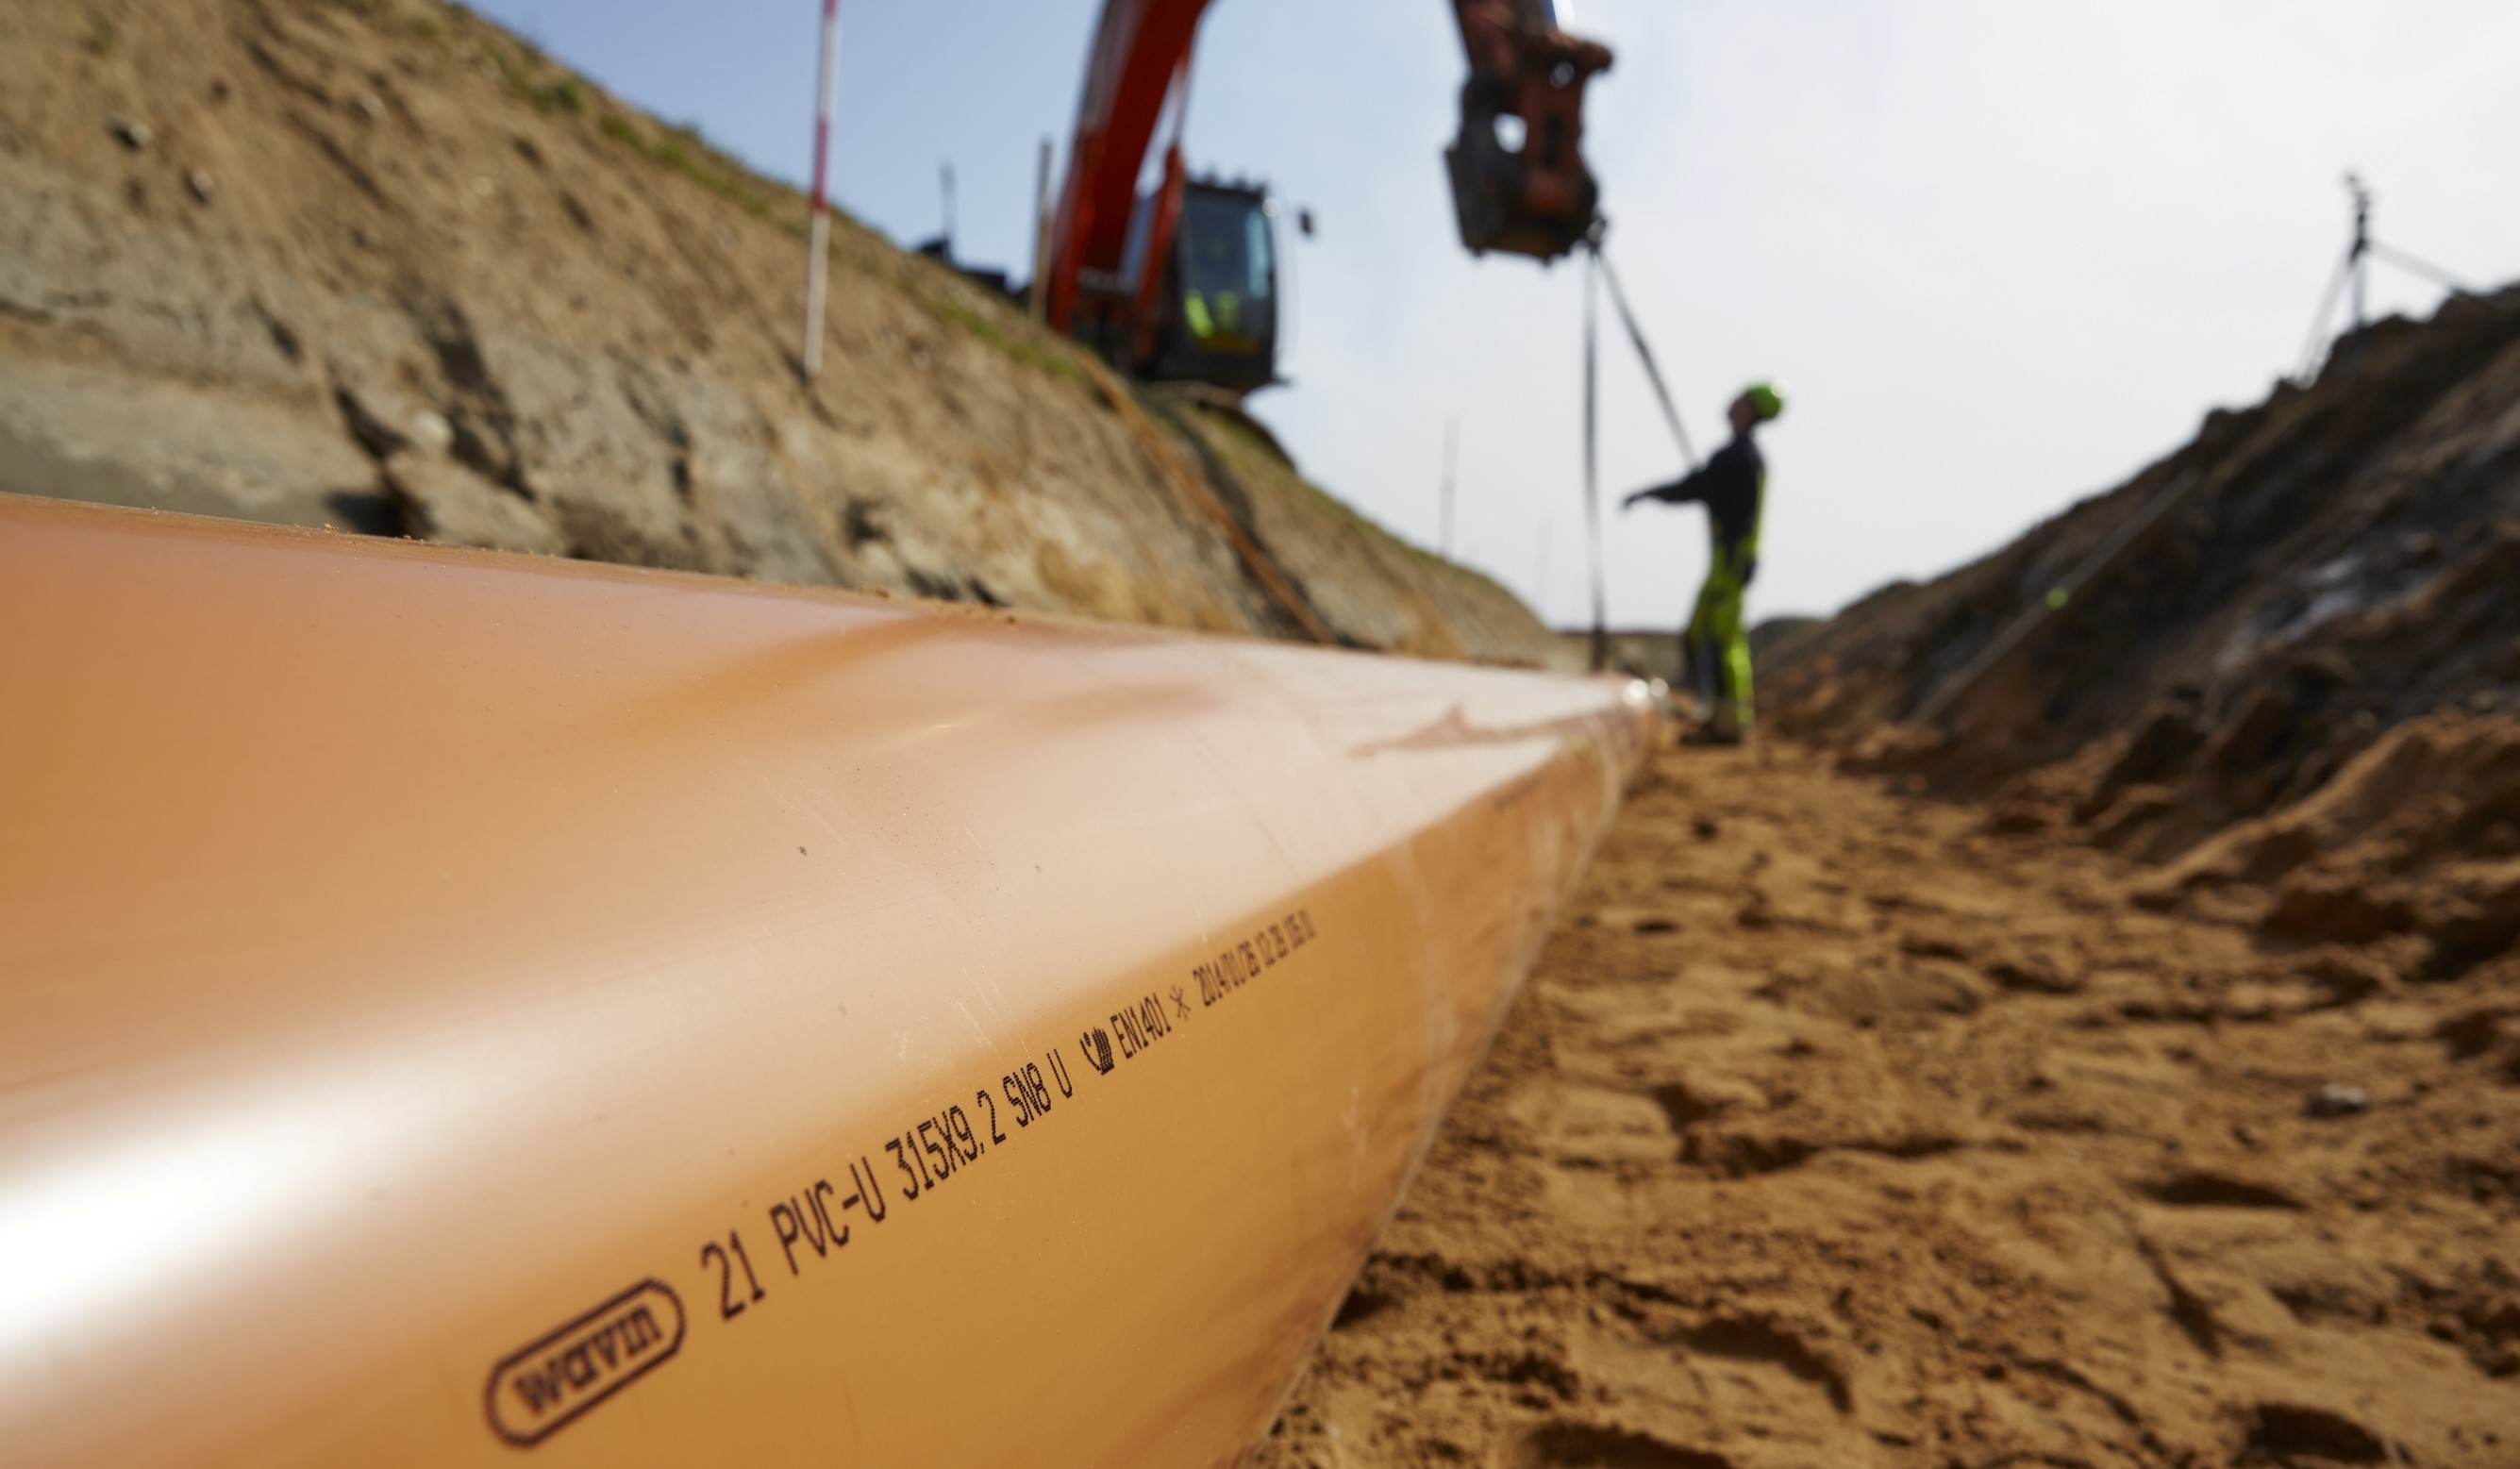 Installing sewer pipes and drains on contaminated land and brownfield sites